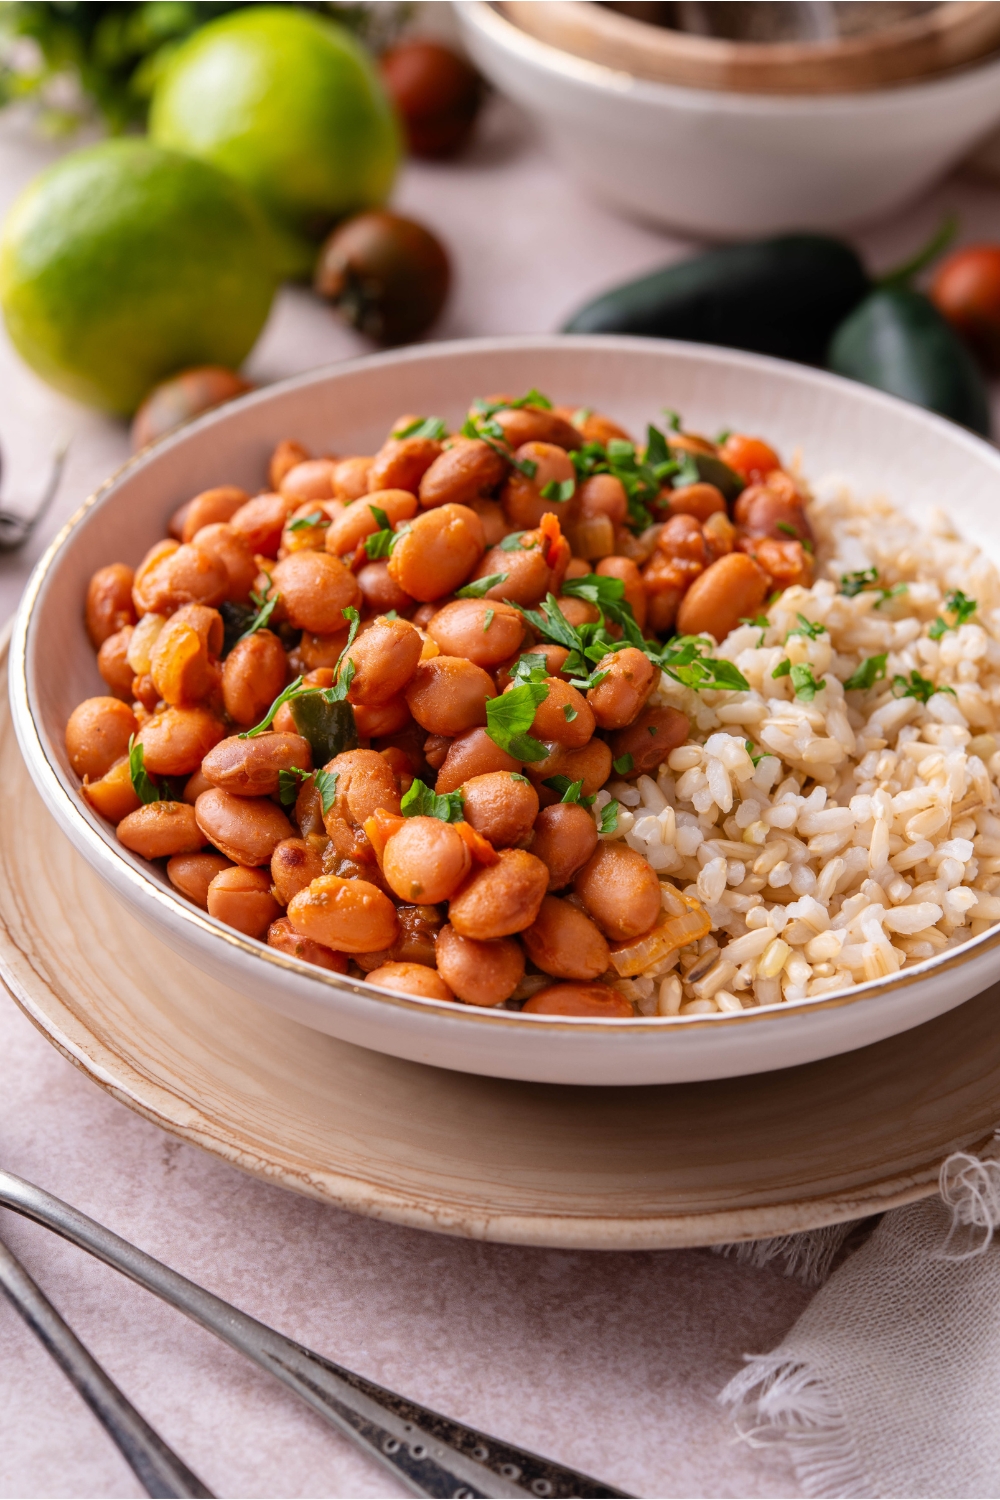 A bowl of Mexican pinto beans with a side of brown rice and fresh green herbs on top.